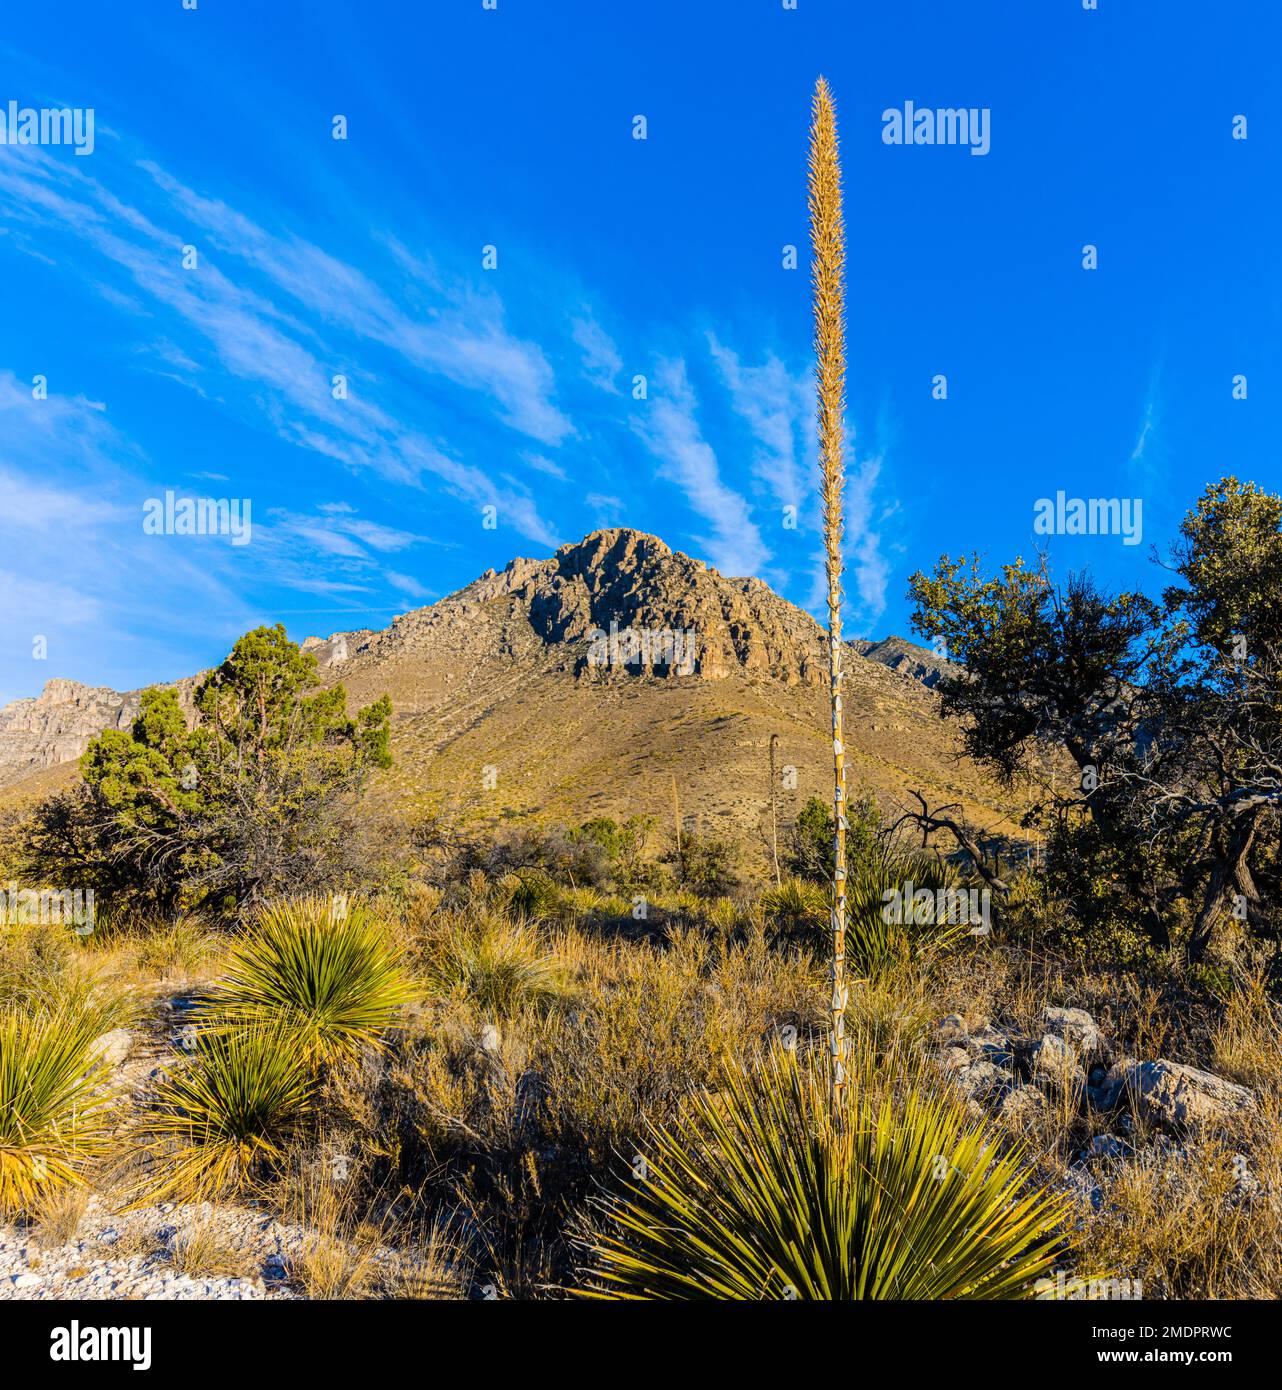 The Foothills of The Guadalupe Mountains Below Hunters Peak at Pine Springs, Guadalupe Mountains, National Park, Texas, USA Stock Photo